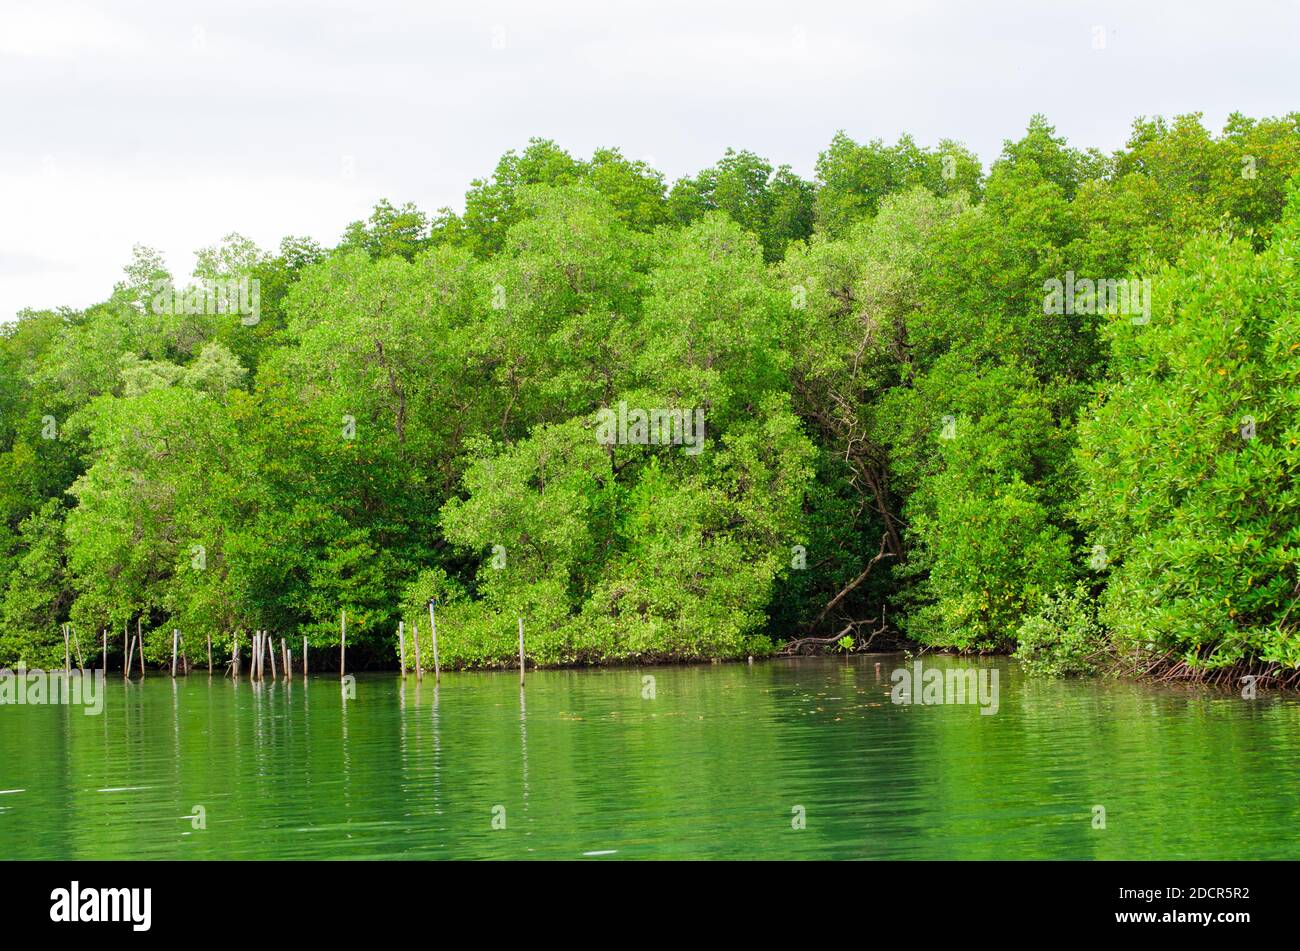 green nature landscape of mangrove forest Stock Photo